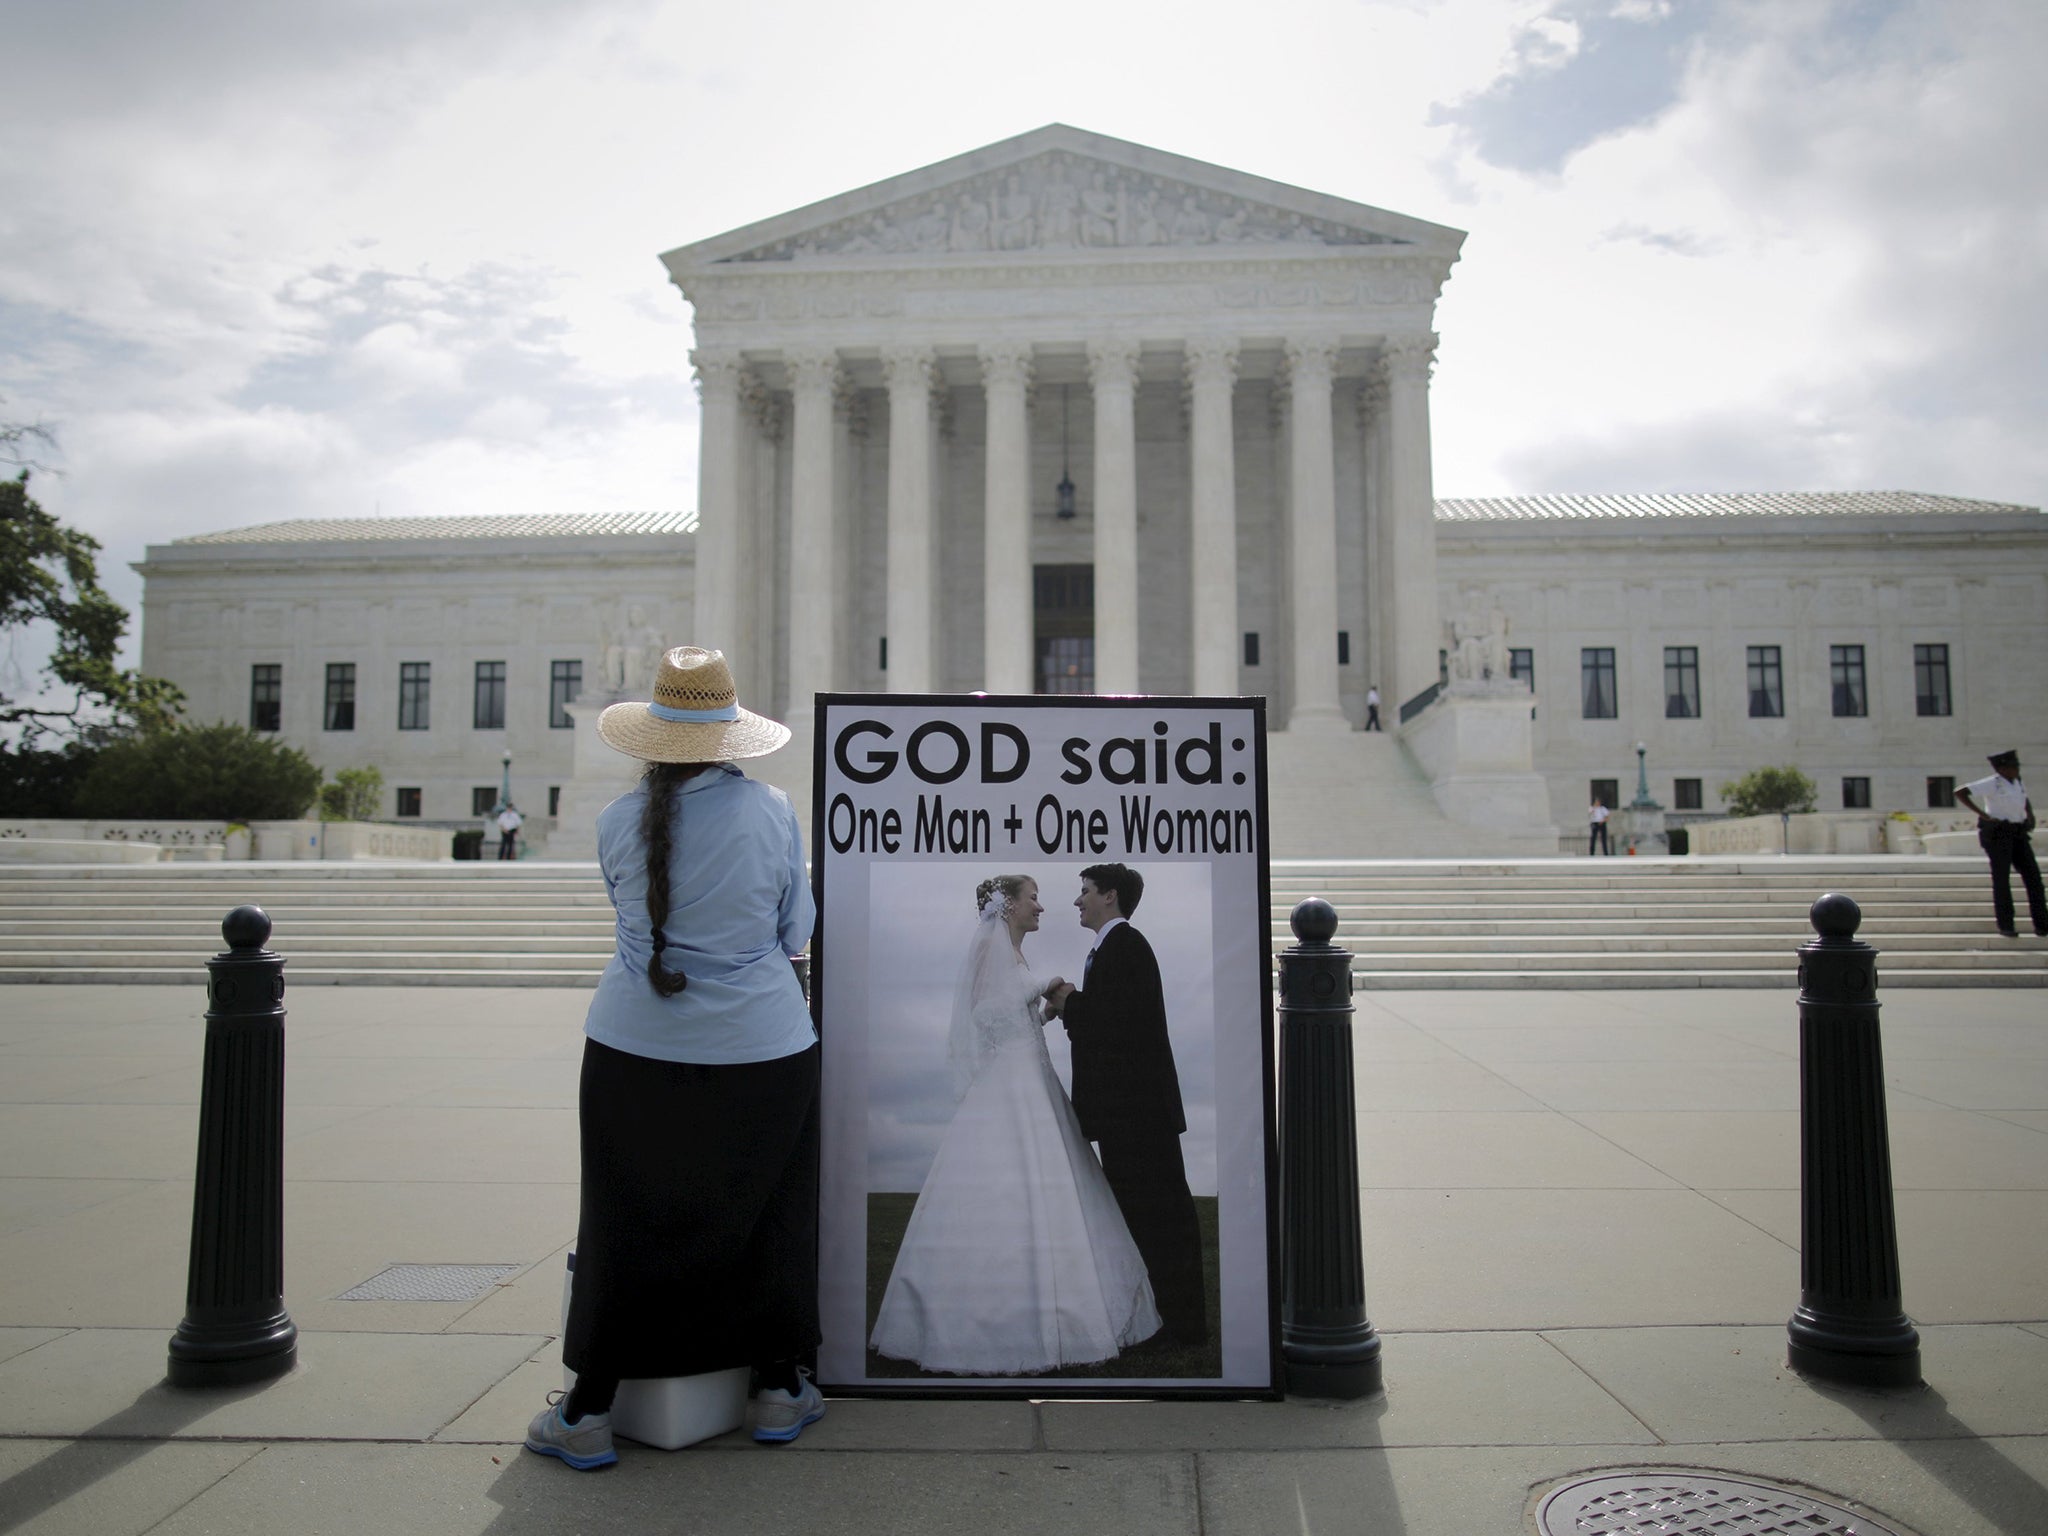 The Supreme Court could make it illegal for any state to ban same-sex marriages